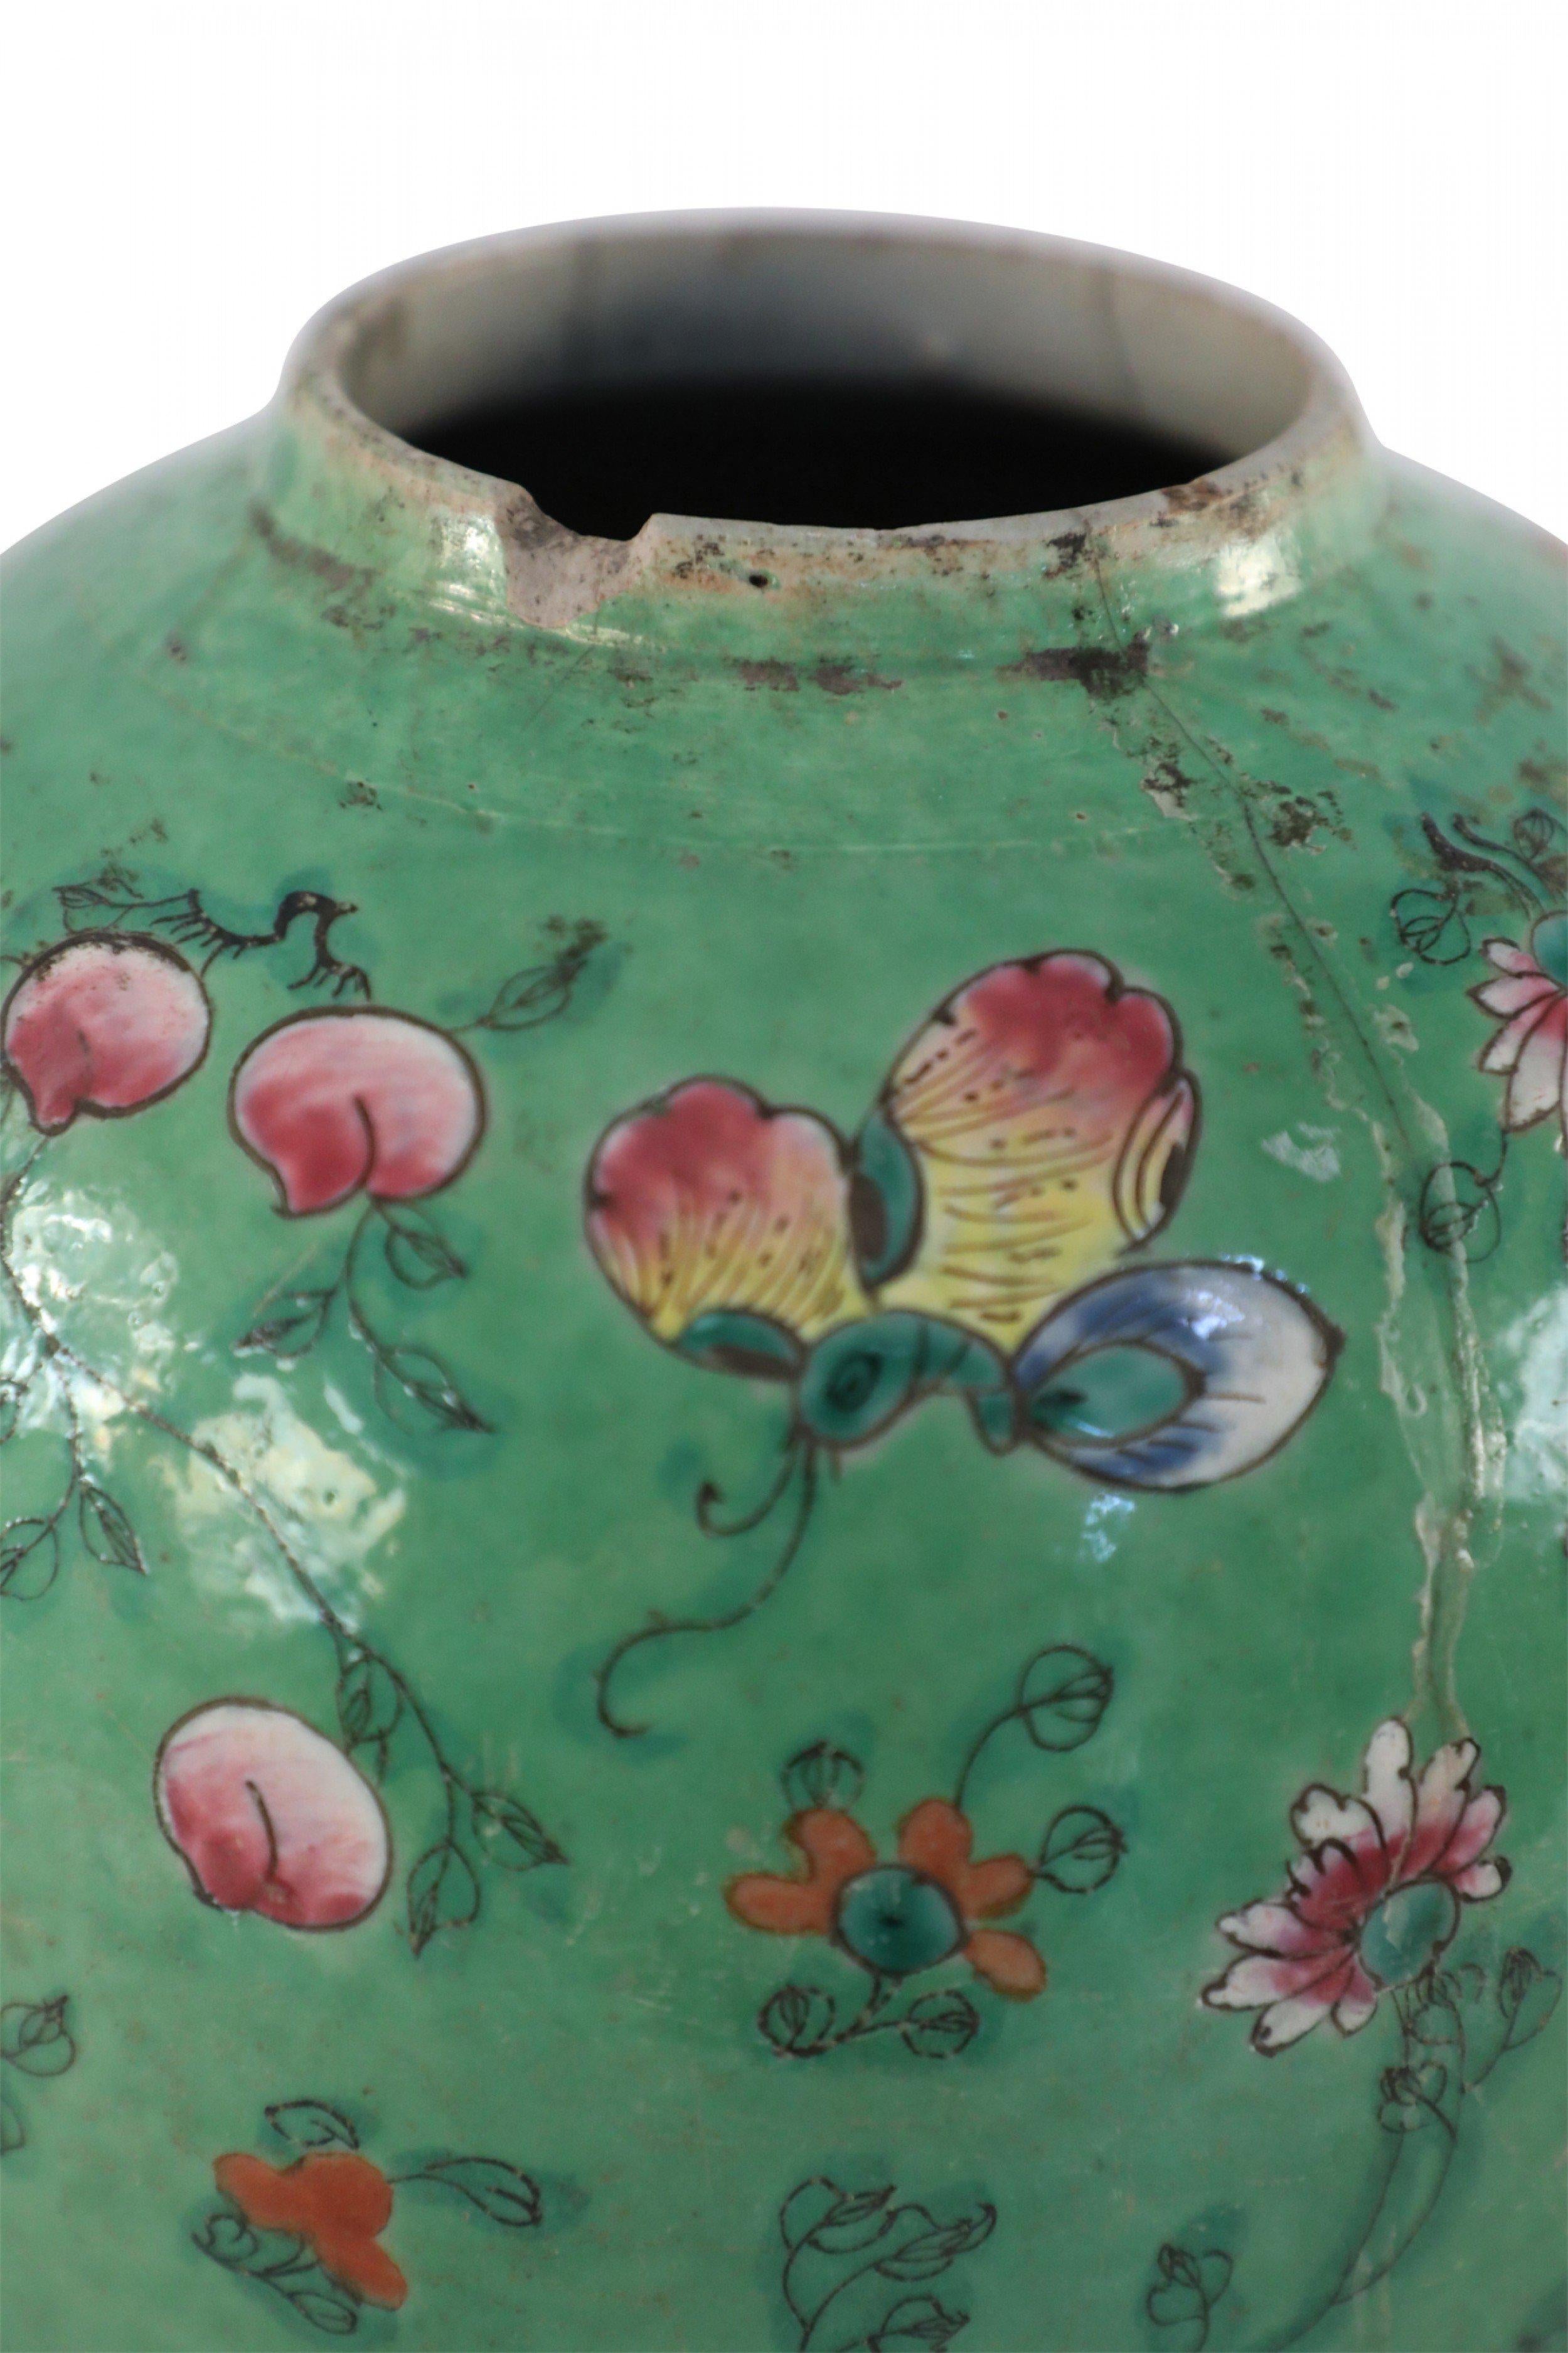 Antique Chinese (Early 20th Century) green porcelain vase with a round form, known as a watermelon jar, incised and painted with delicate, spaced florals in pink, red, yellow, and green tones, and made with a hole in the base.
  